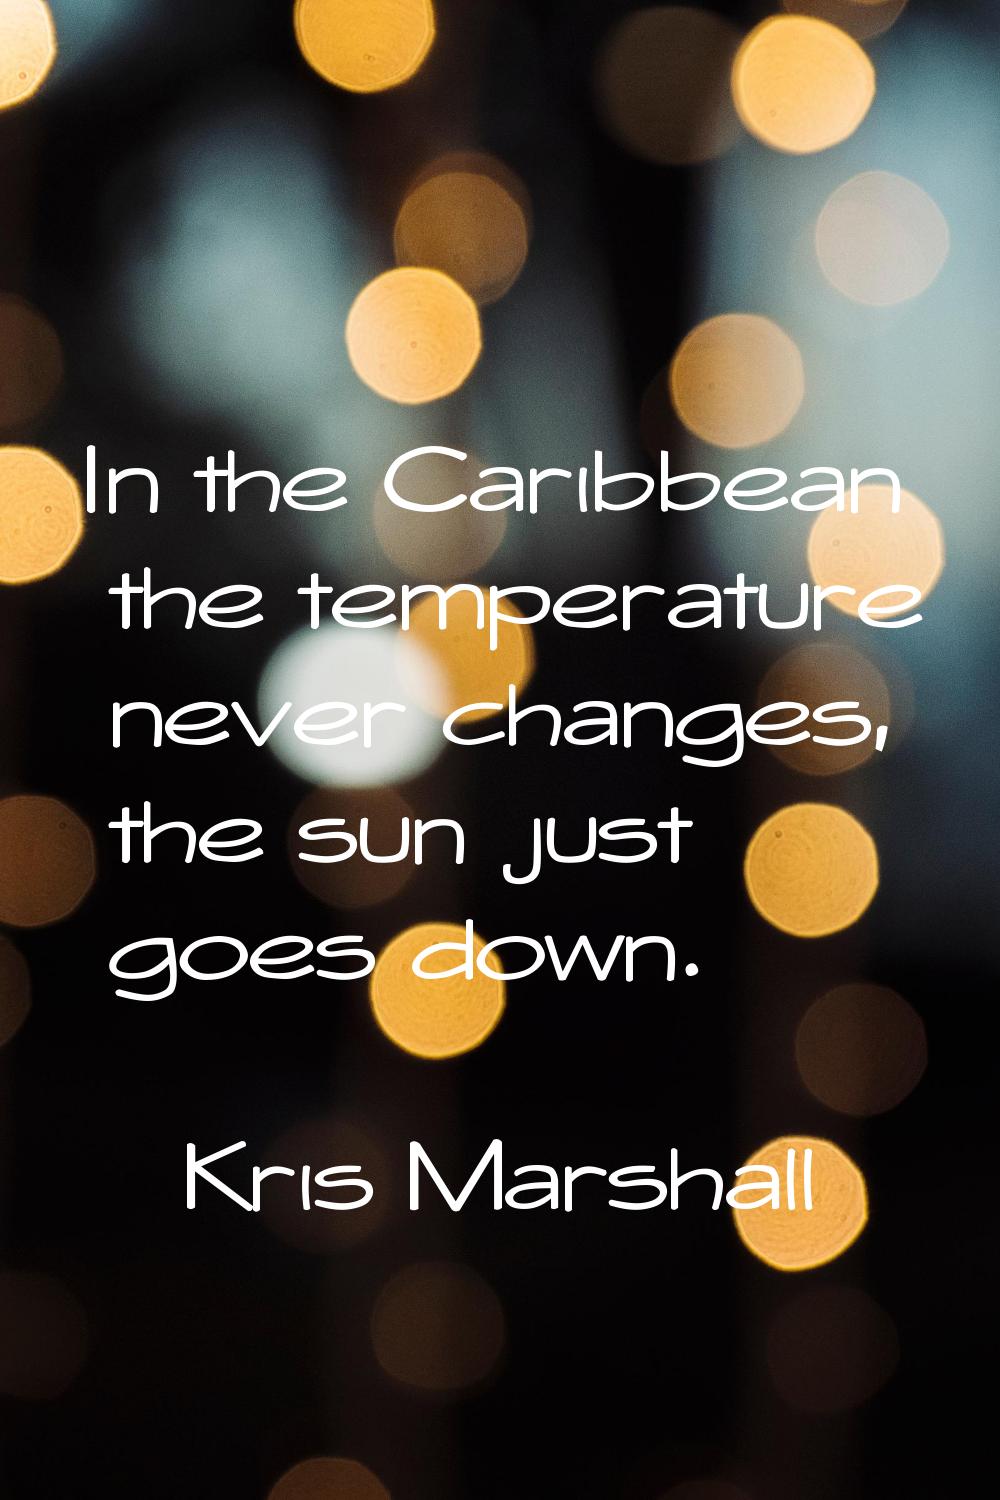 In the Caribbean the temperature never changes, the sun just goes down.